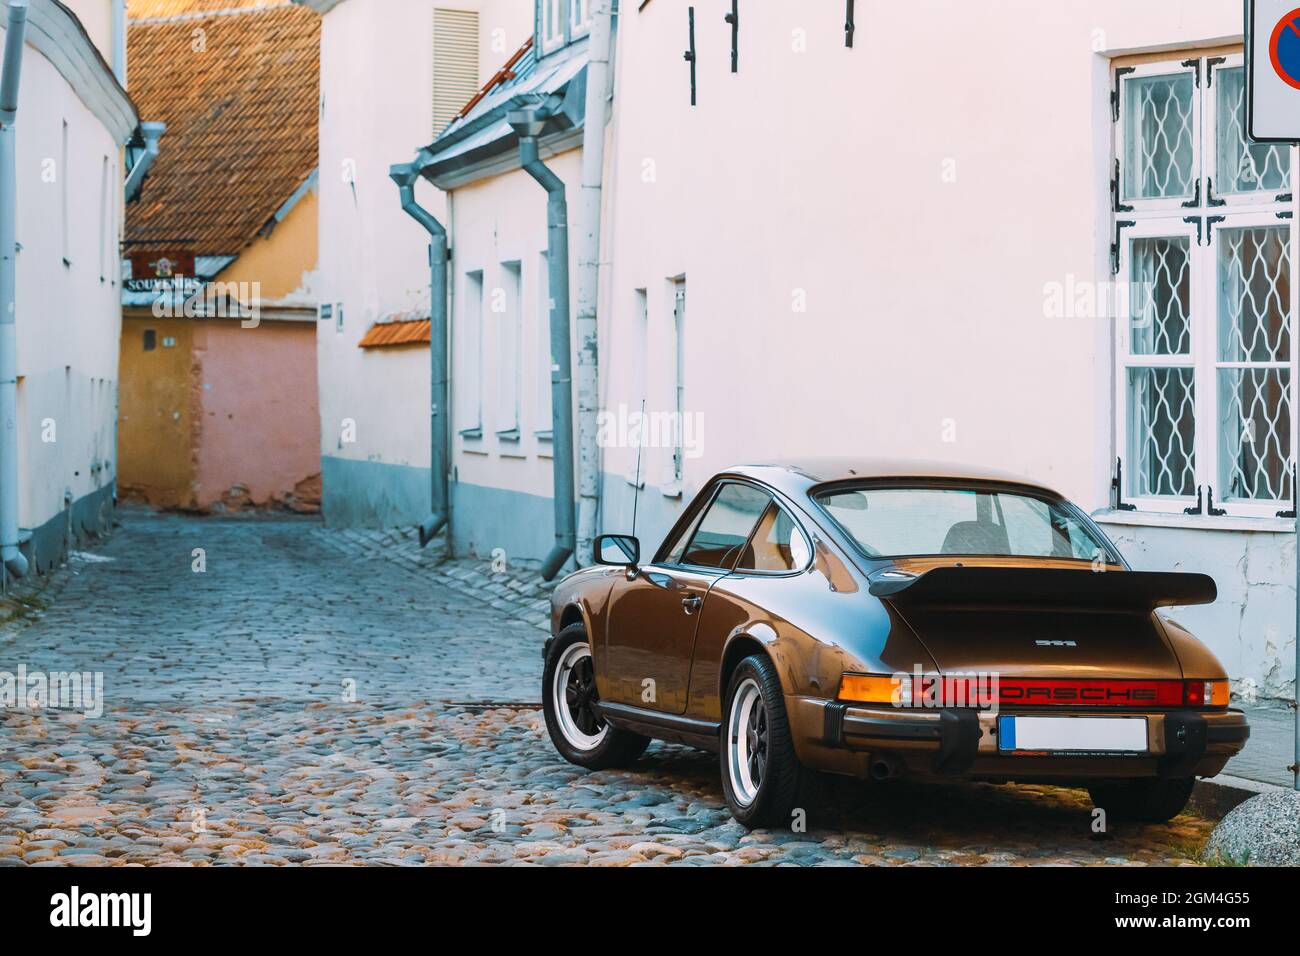 Side View Of Porsche 930 Car Parked In Old Narrow Street. Stock Photo